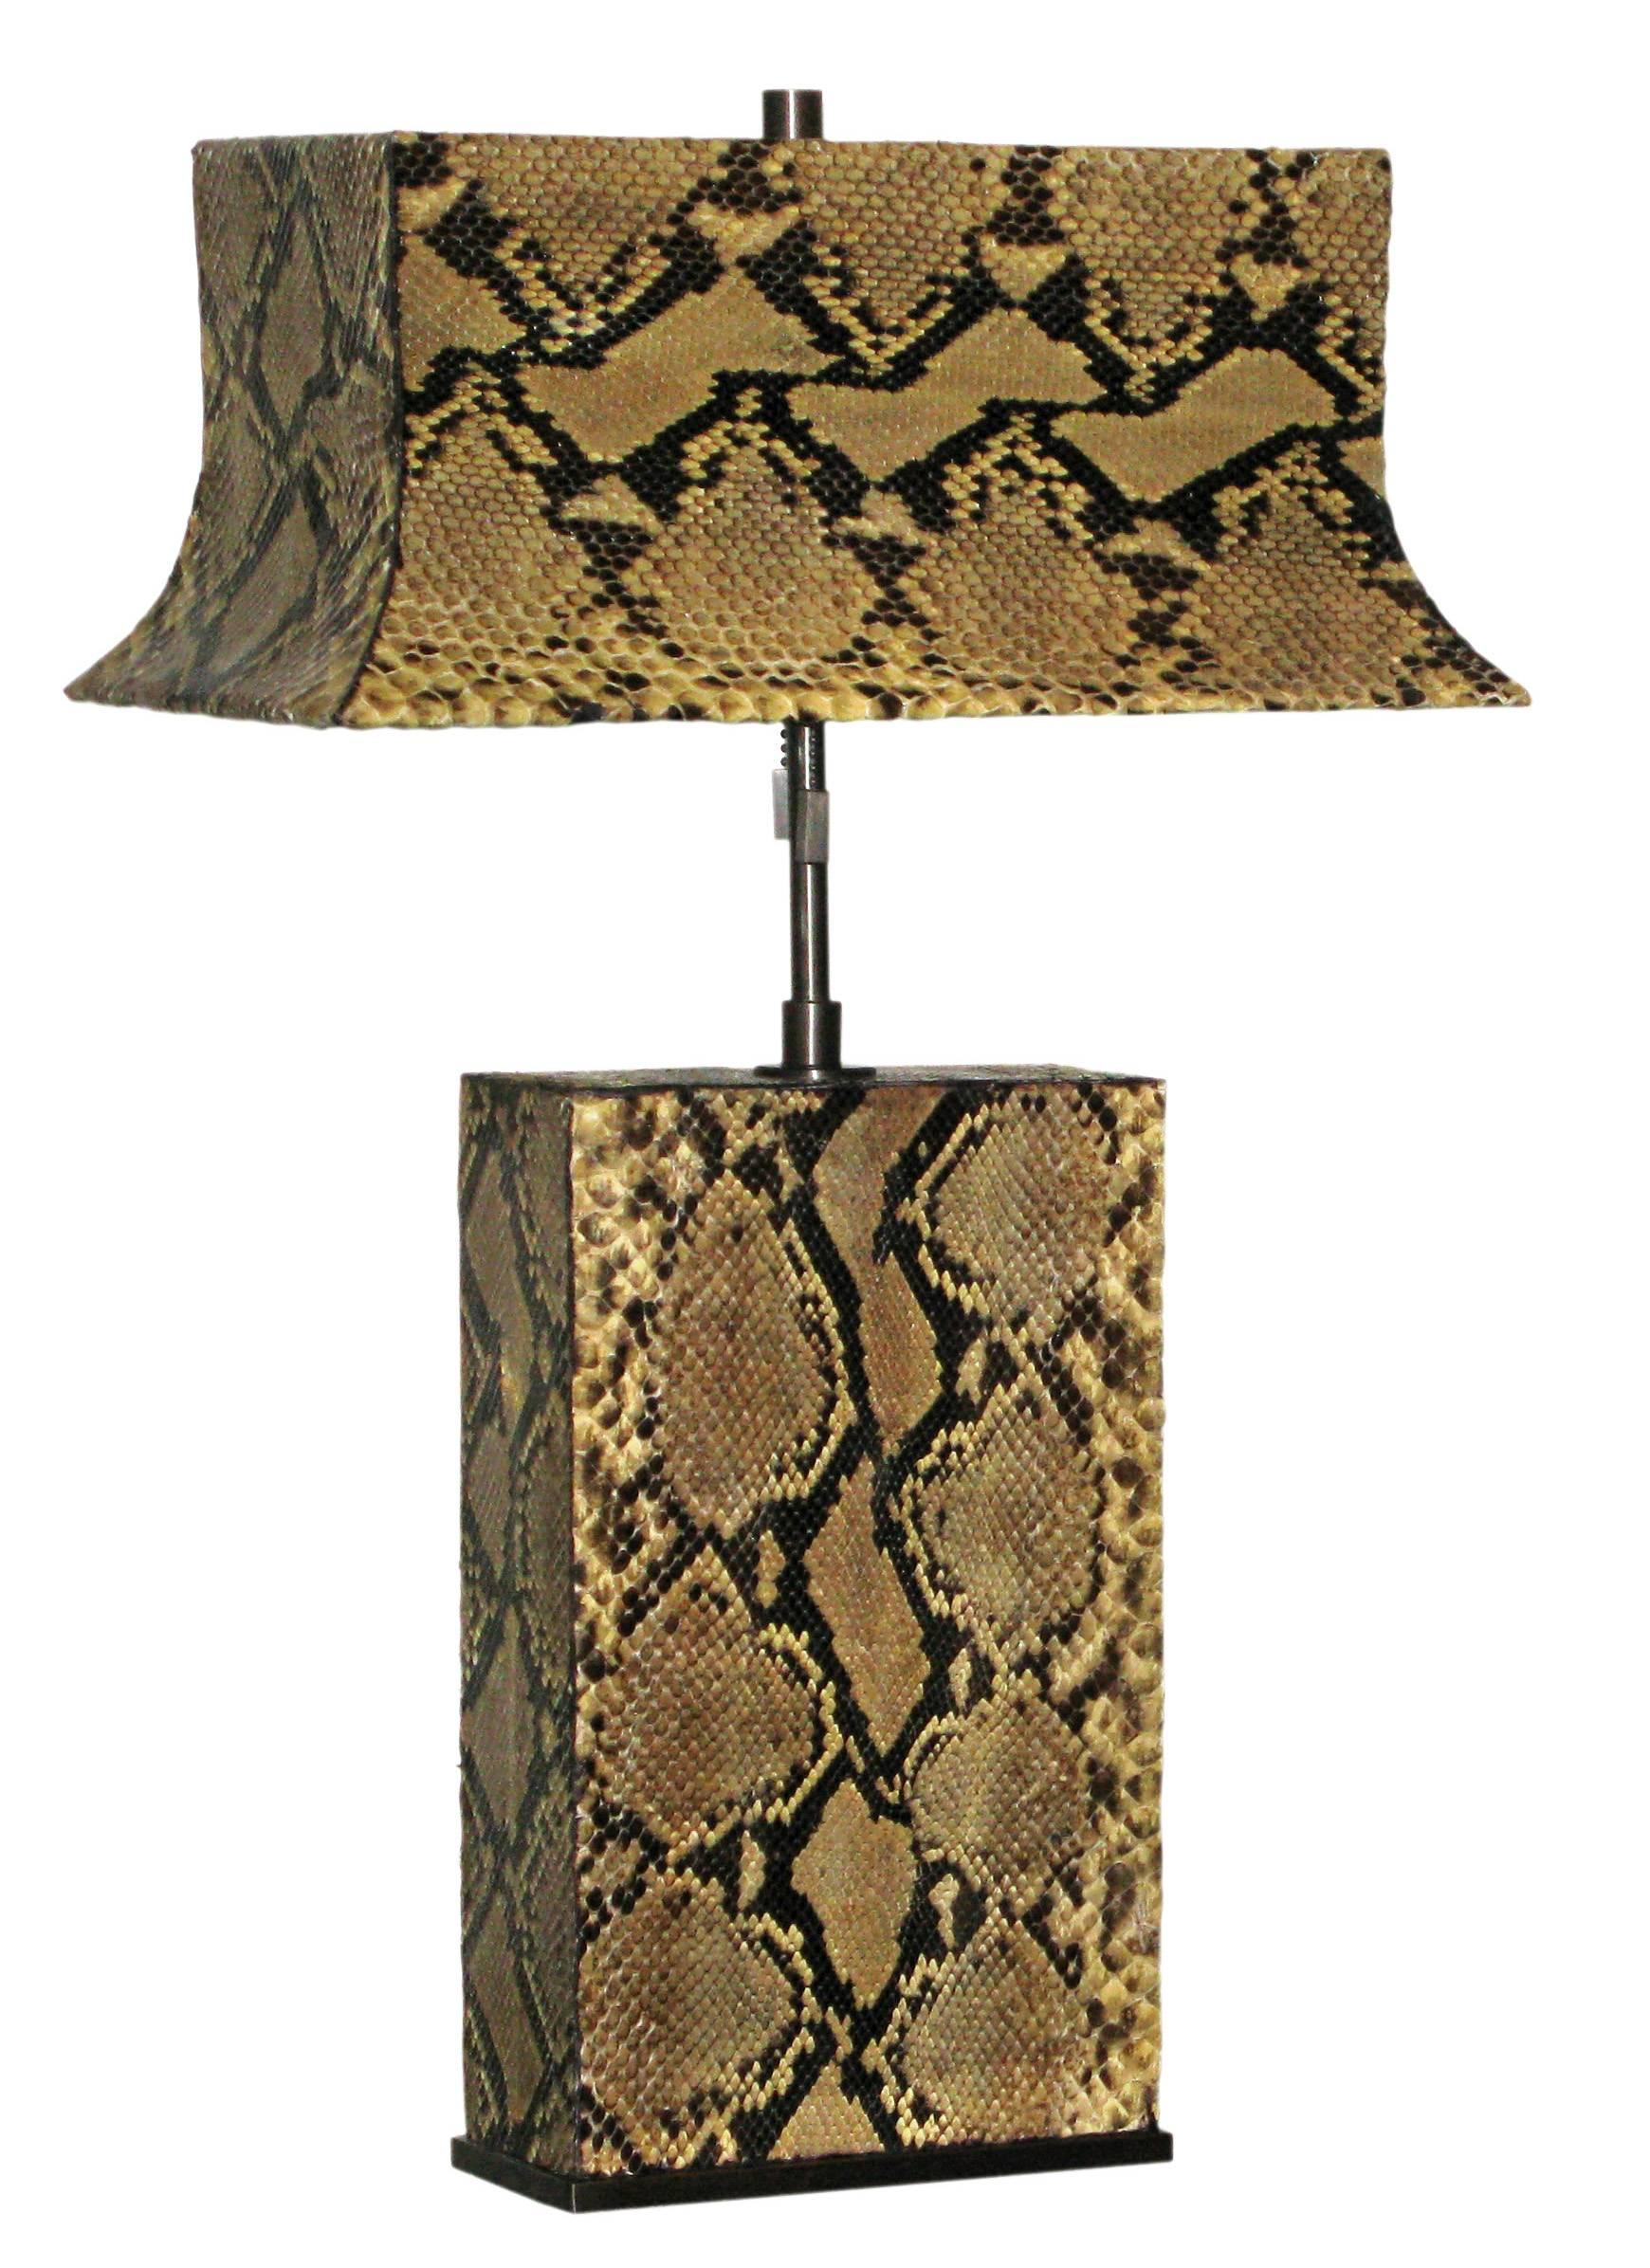 Exceptional pair of table lamps in bronze, with lamps and shades covered in python, designed by Karl Springer, American, 1977
(metal label on shade reads “Karl Springer 1977”).